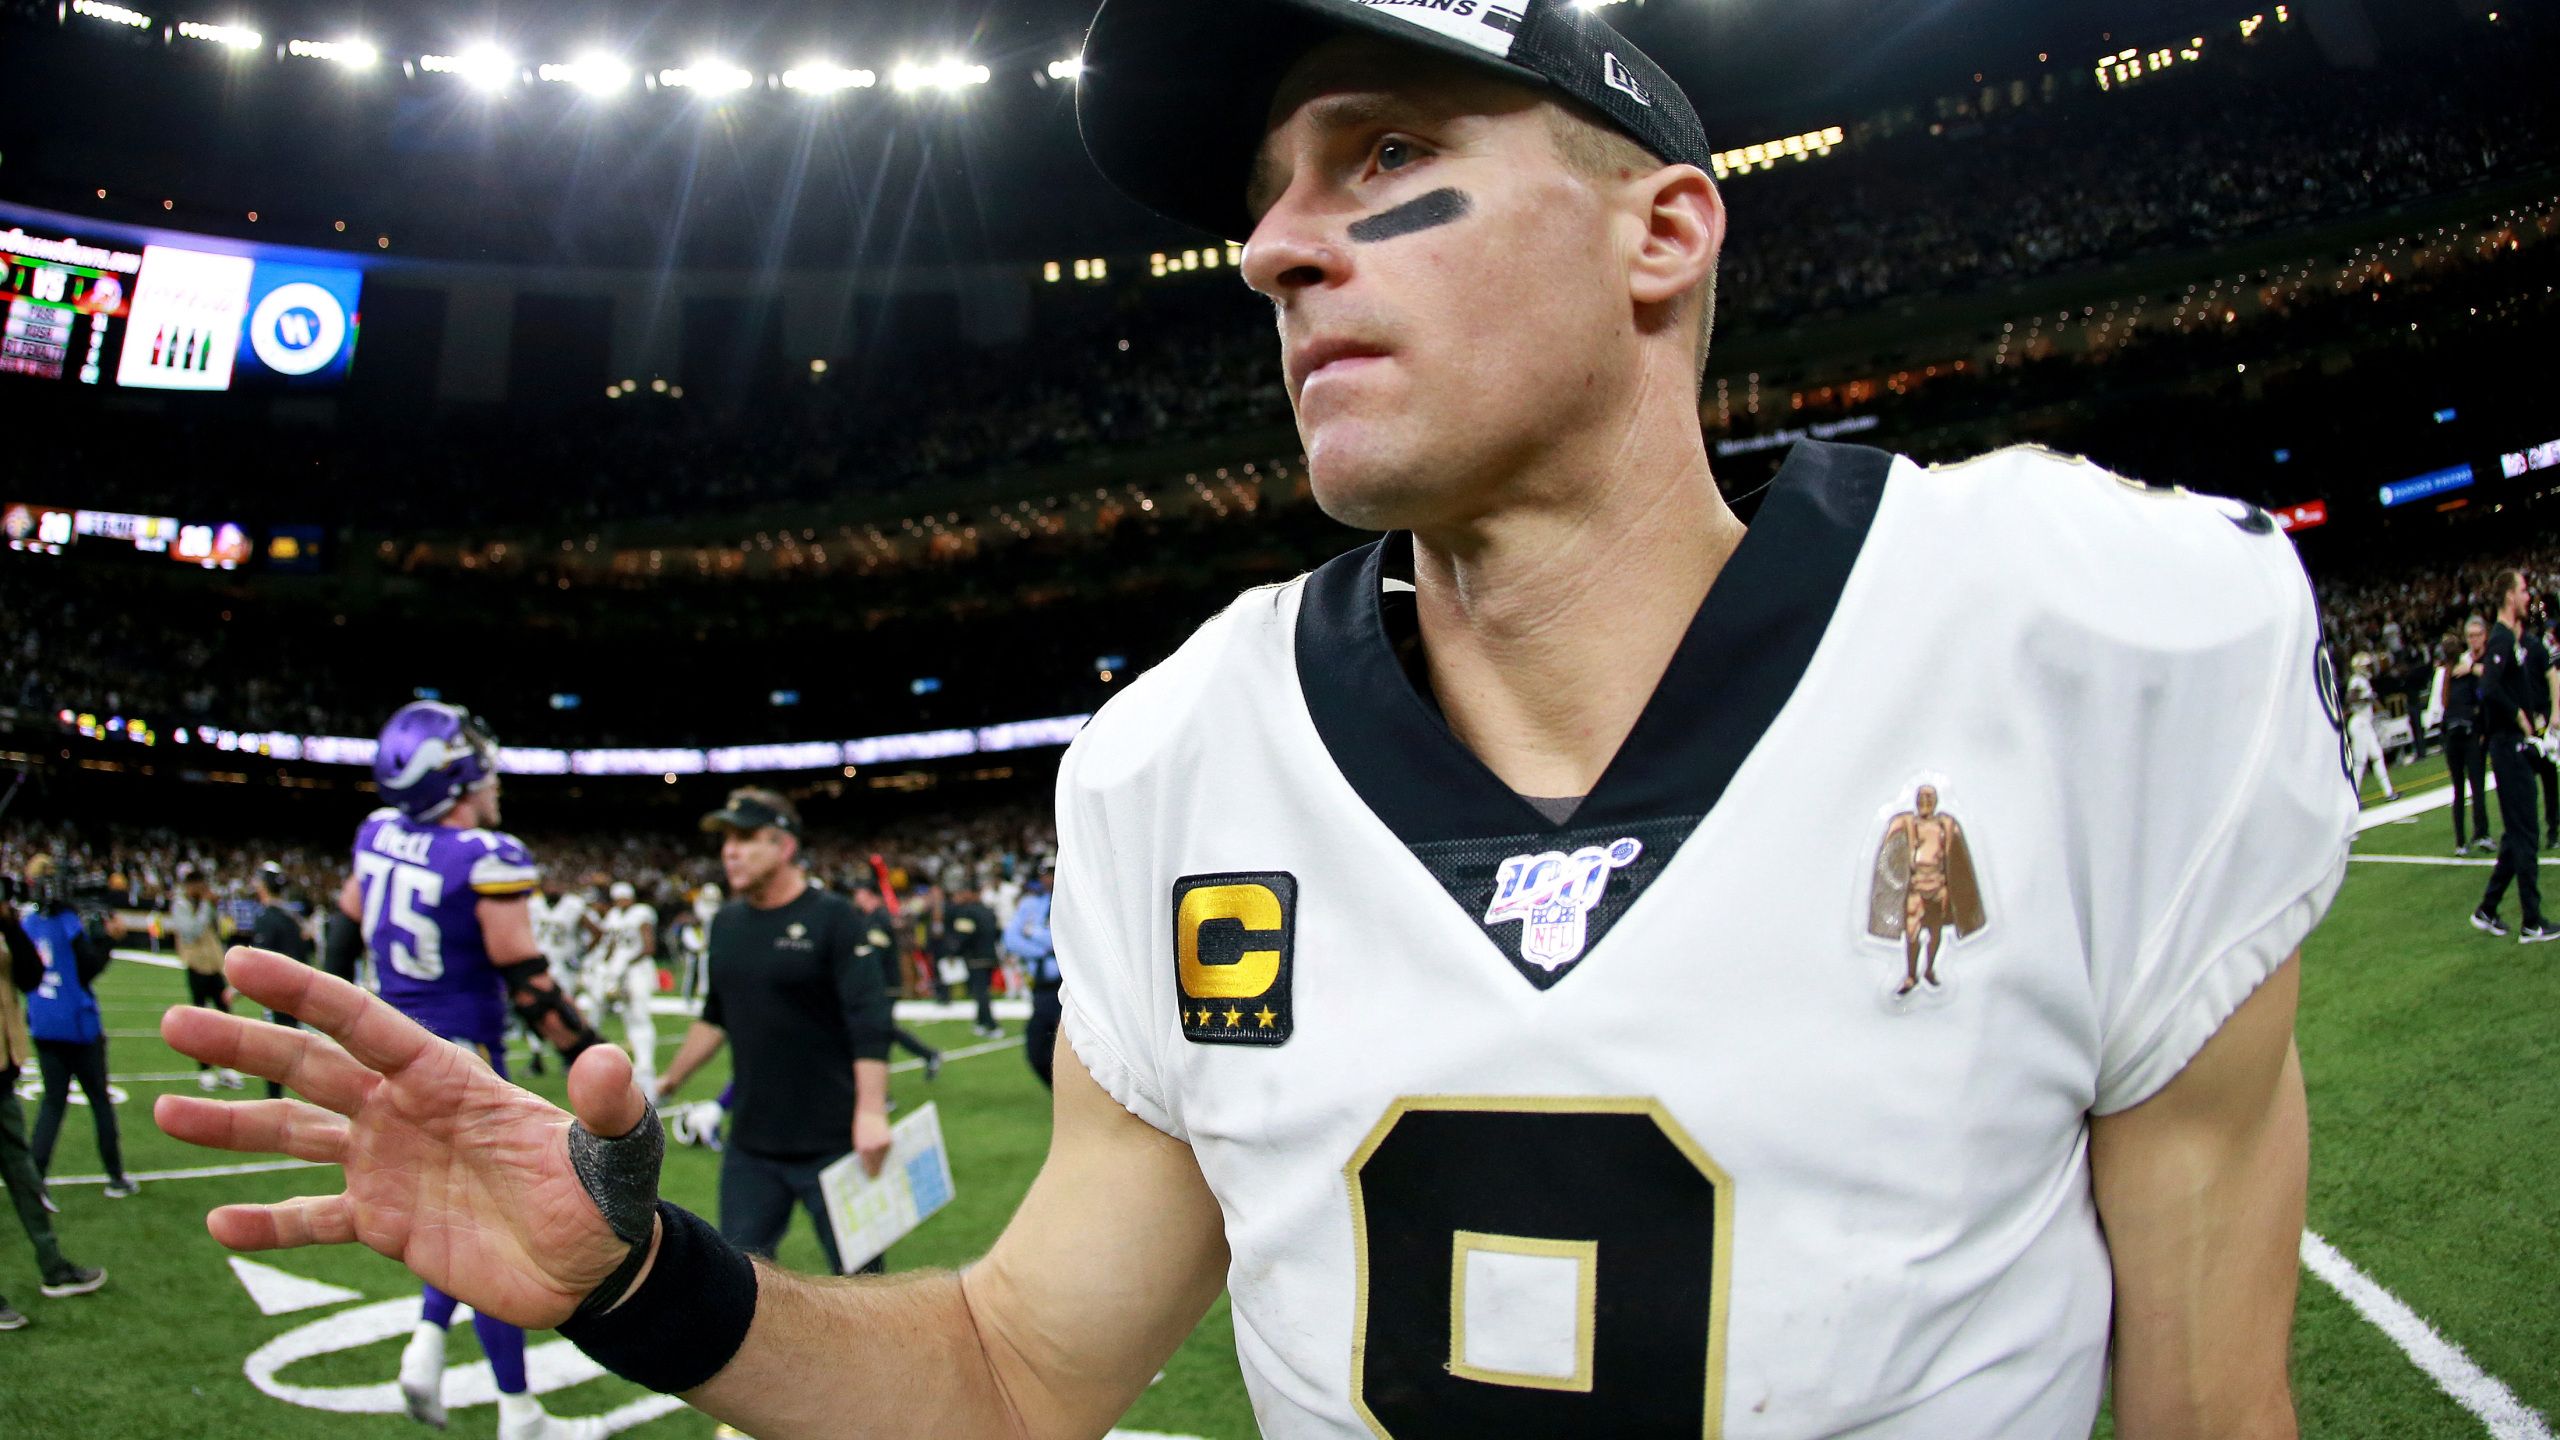 Drew Brees issues apology after anthem comments draw backlash